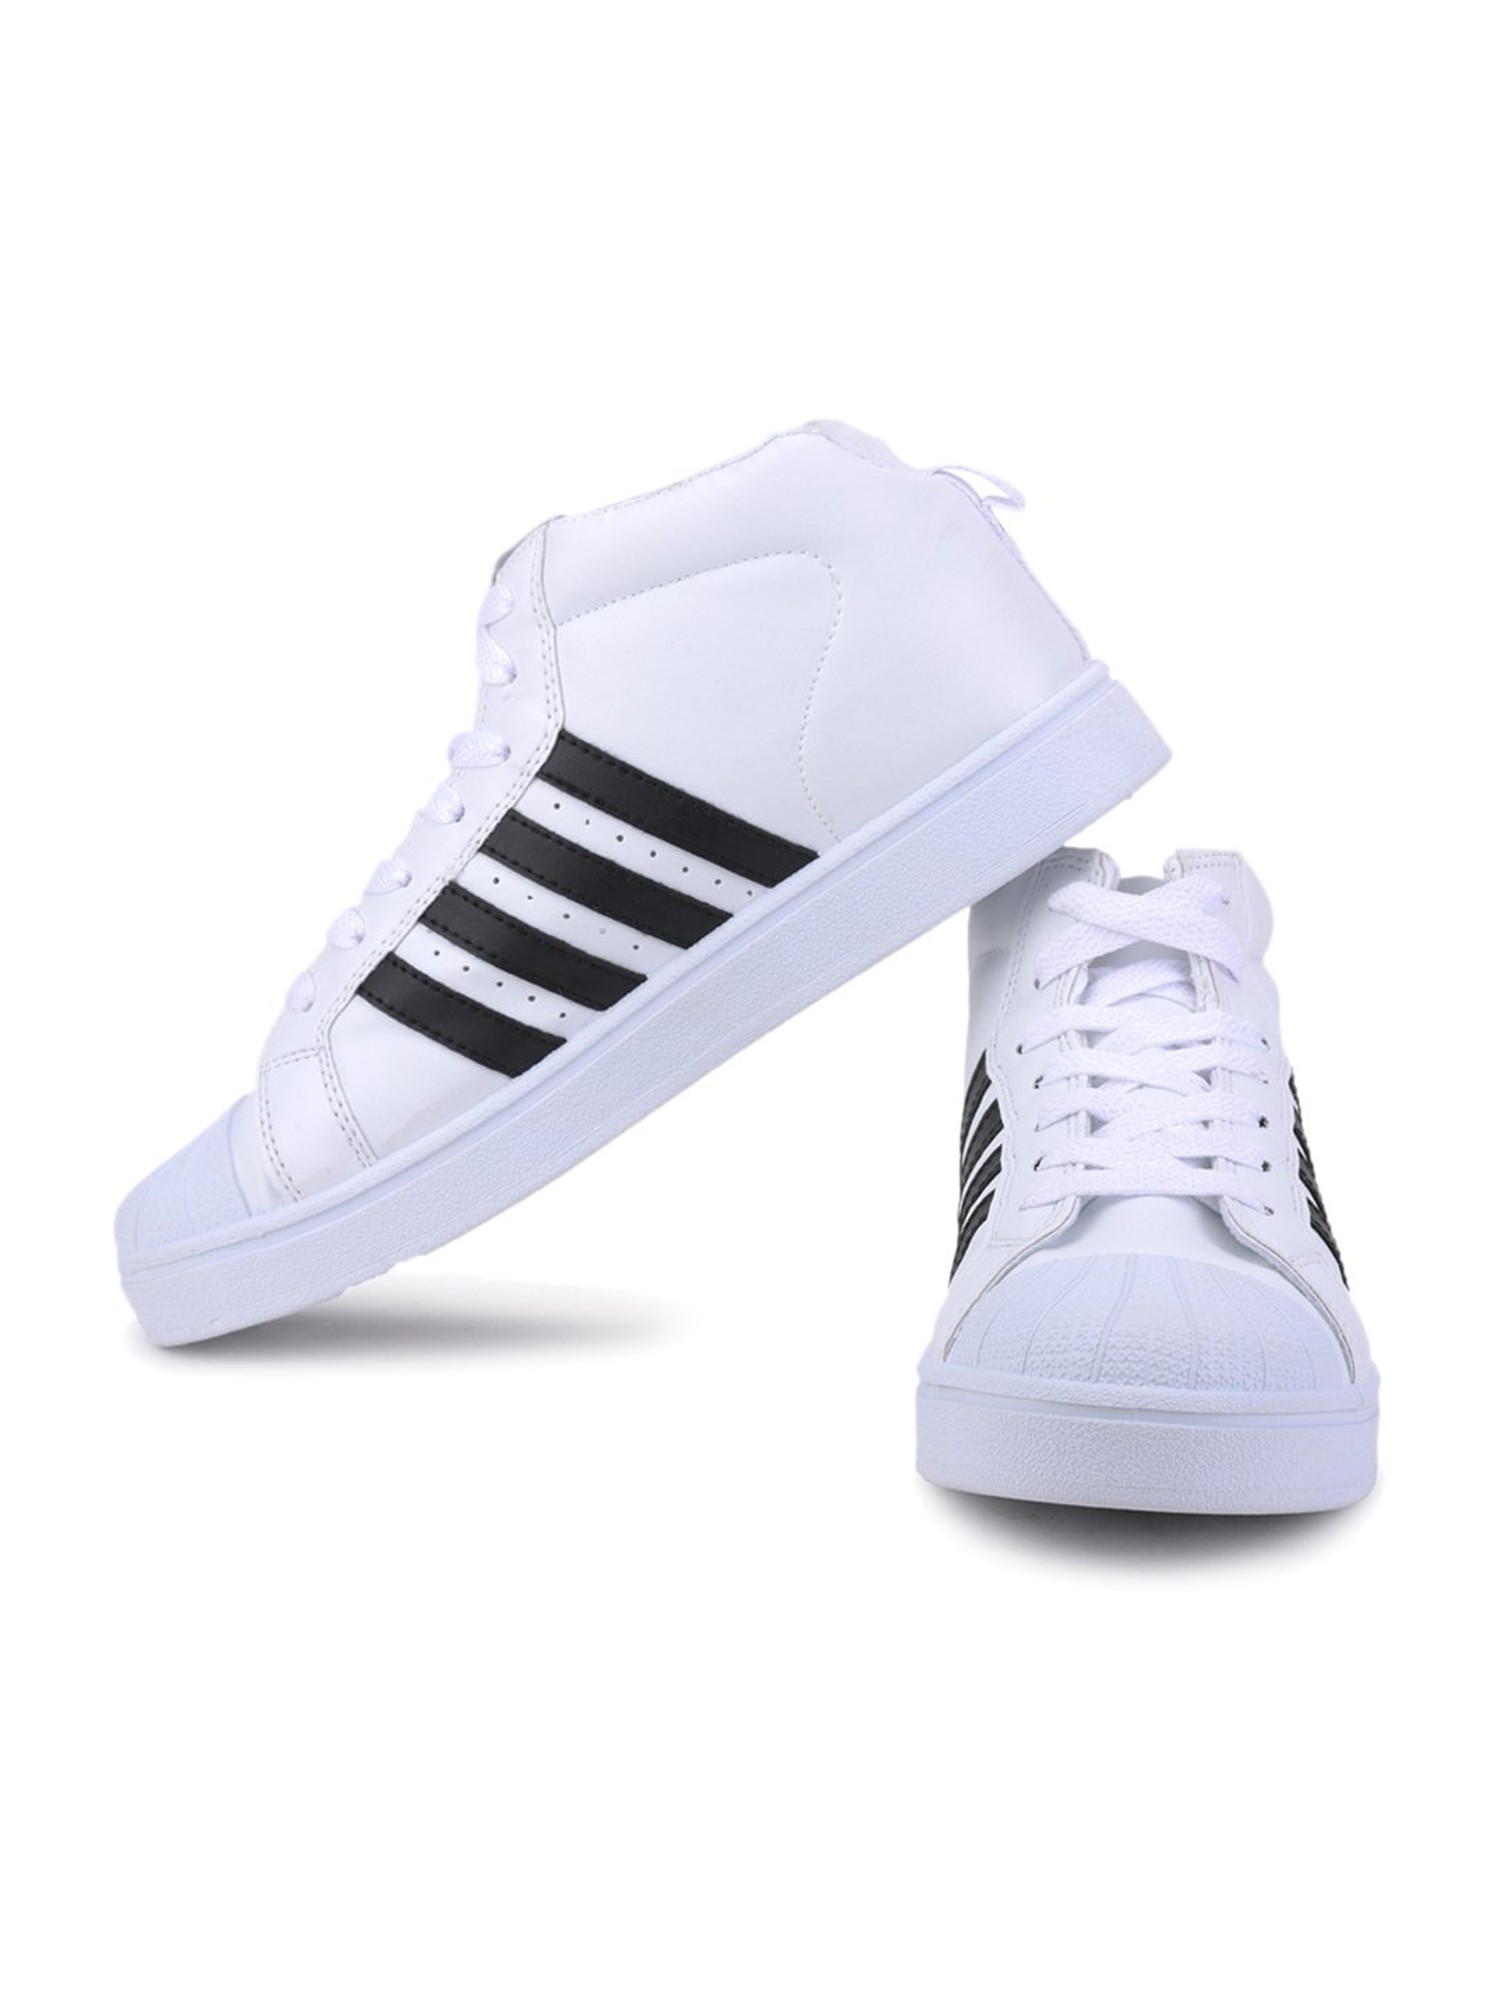 sparx shoes | Sparx white sneakers | unboxing & review - YouTube